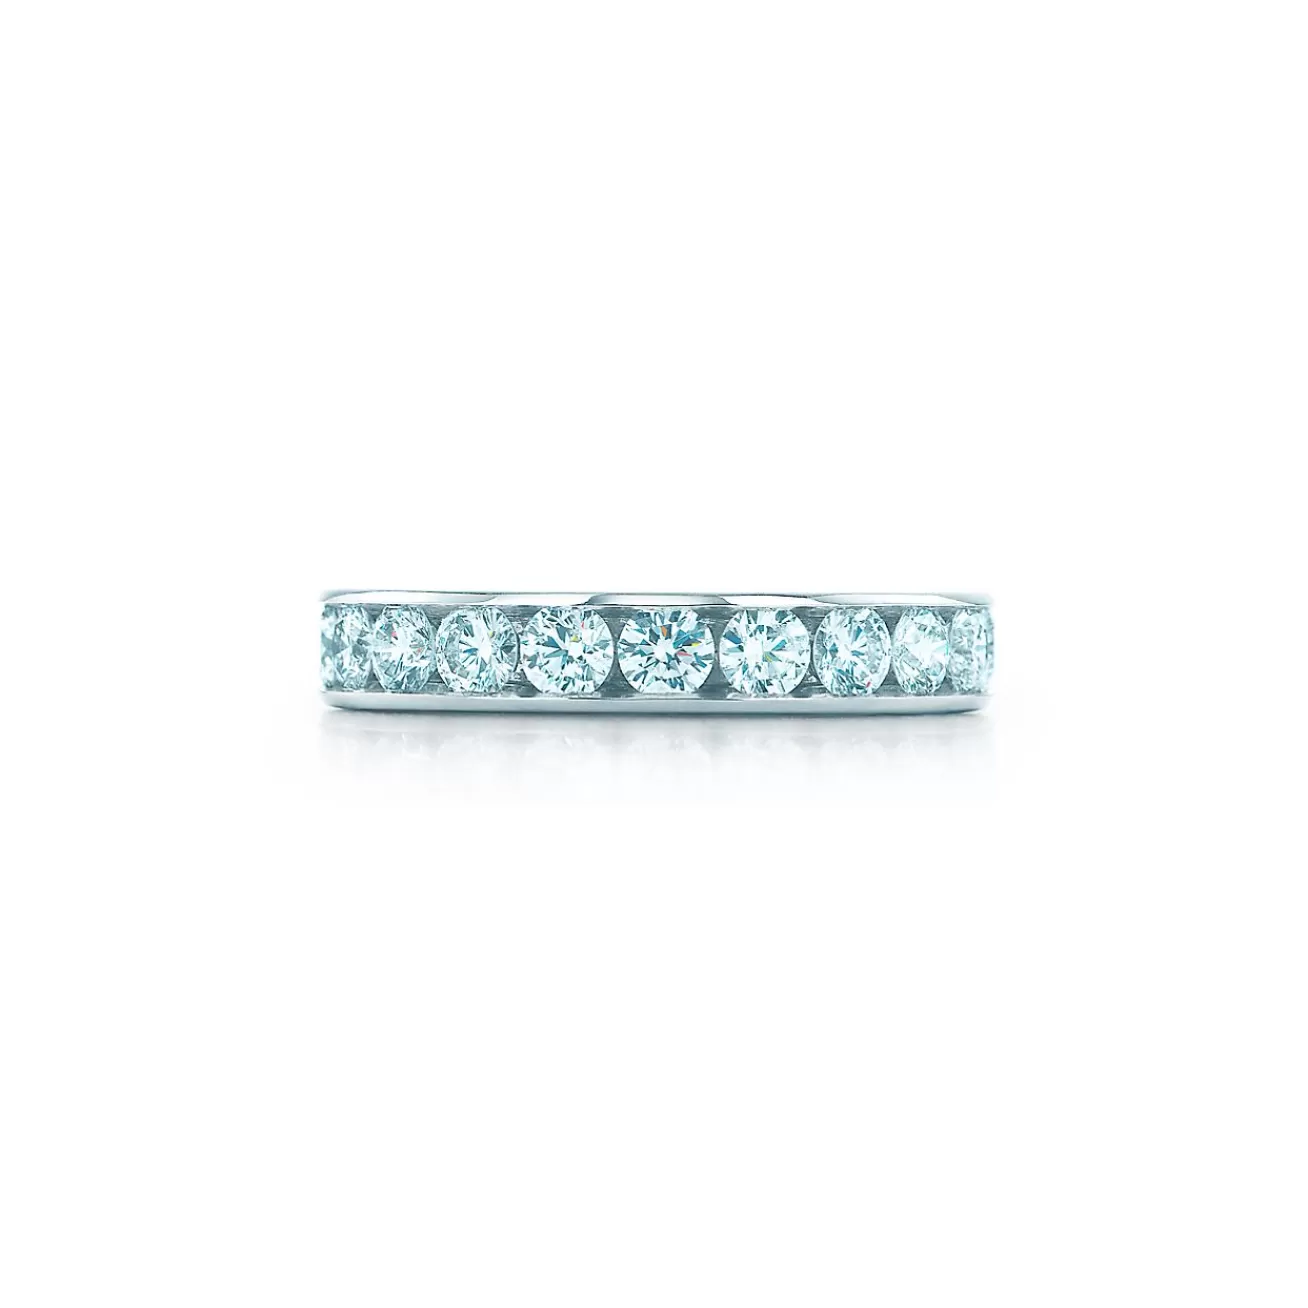 Tiffany & Co. Tiffany® Setting Wedding Band in Platinum with a Full Circle of Diamonds, 4 mm | ^Women Rings | Platinum Jewelry